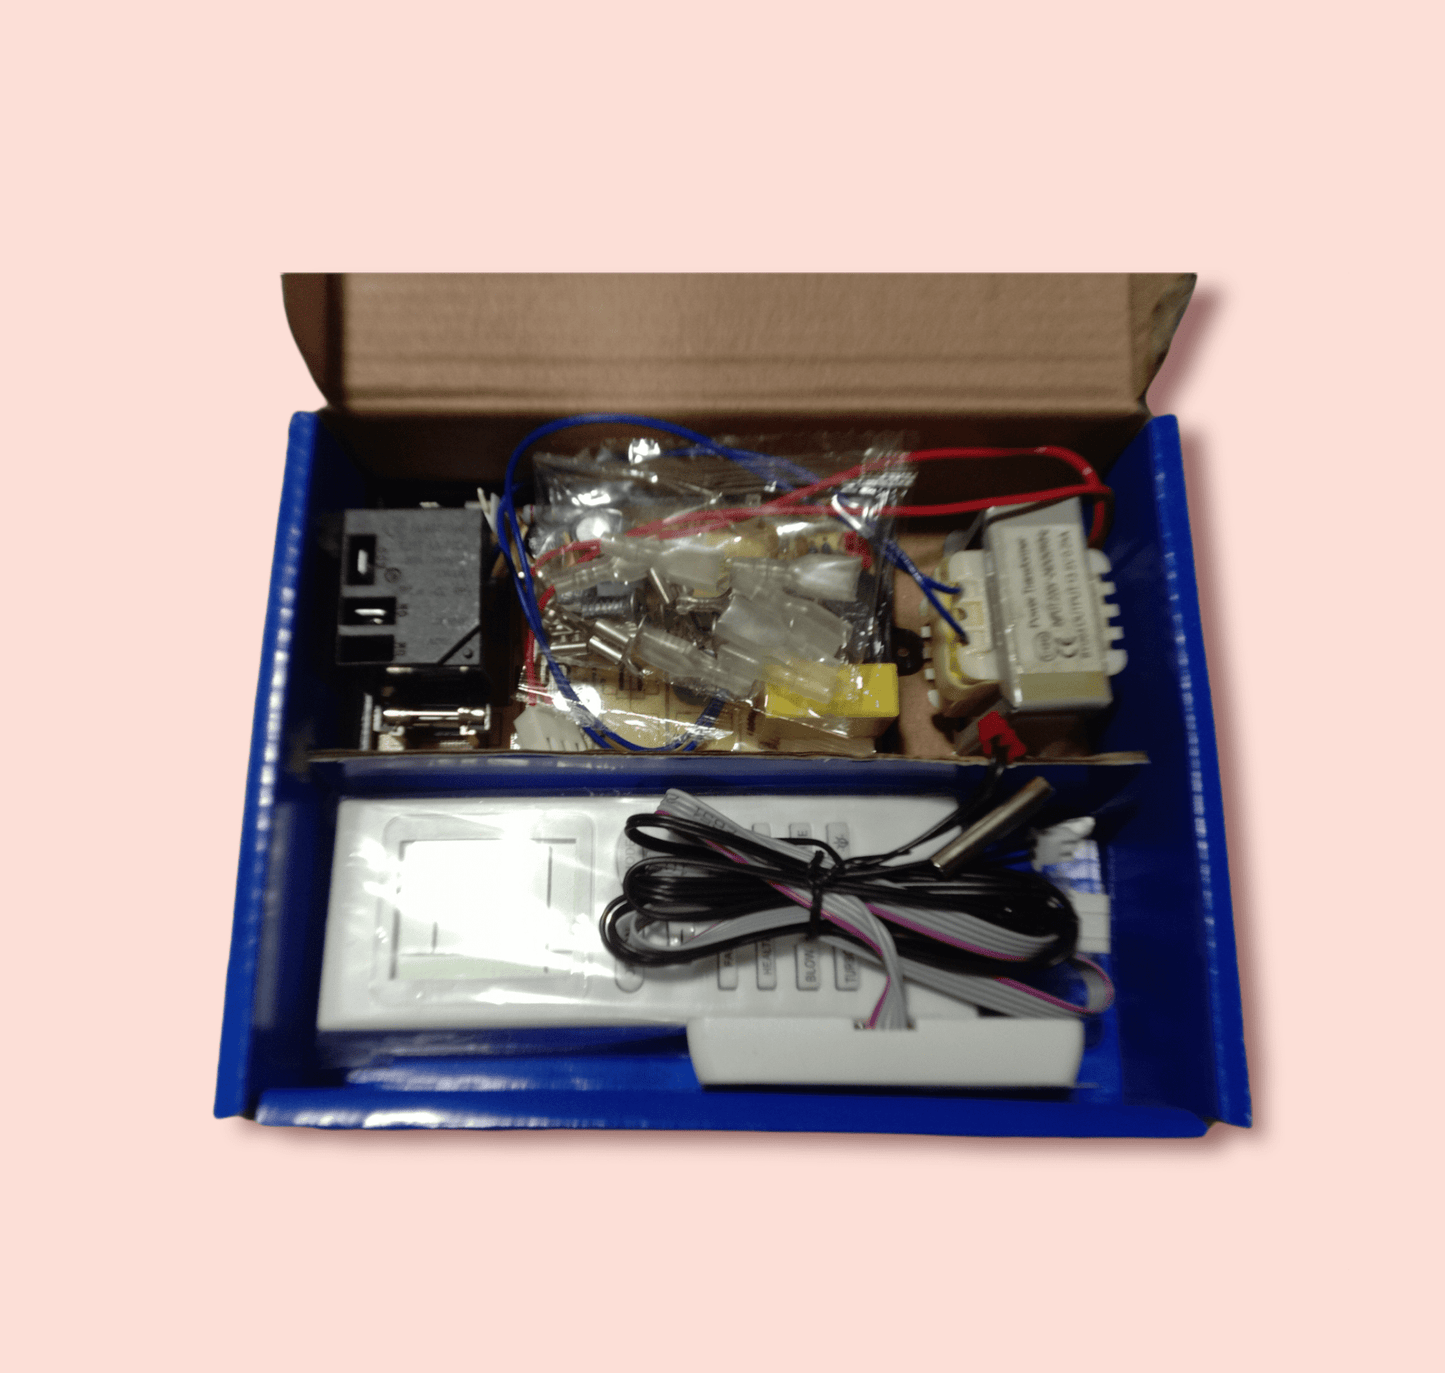 Universal Air Condition Mother Board (Suitable for All model AC)